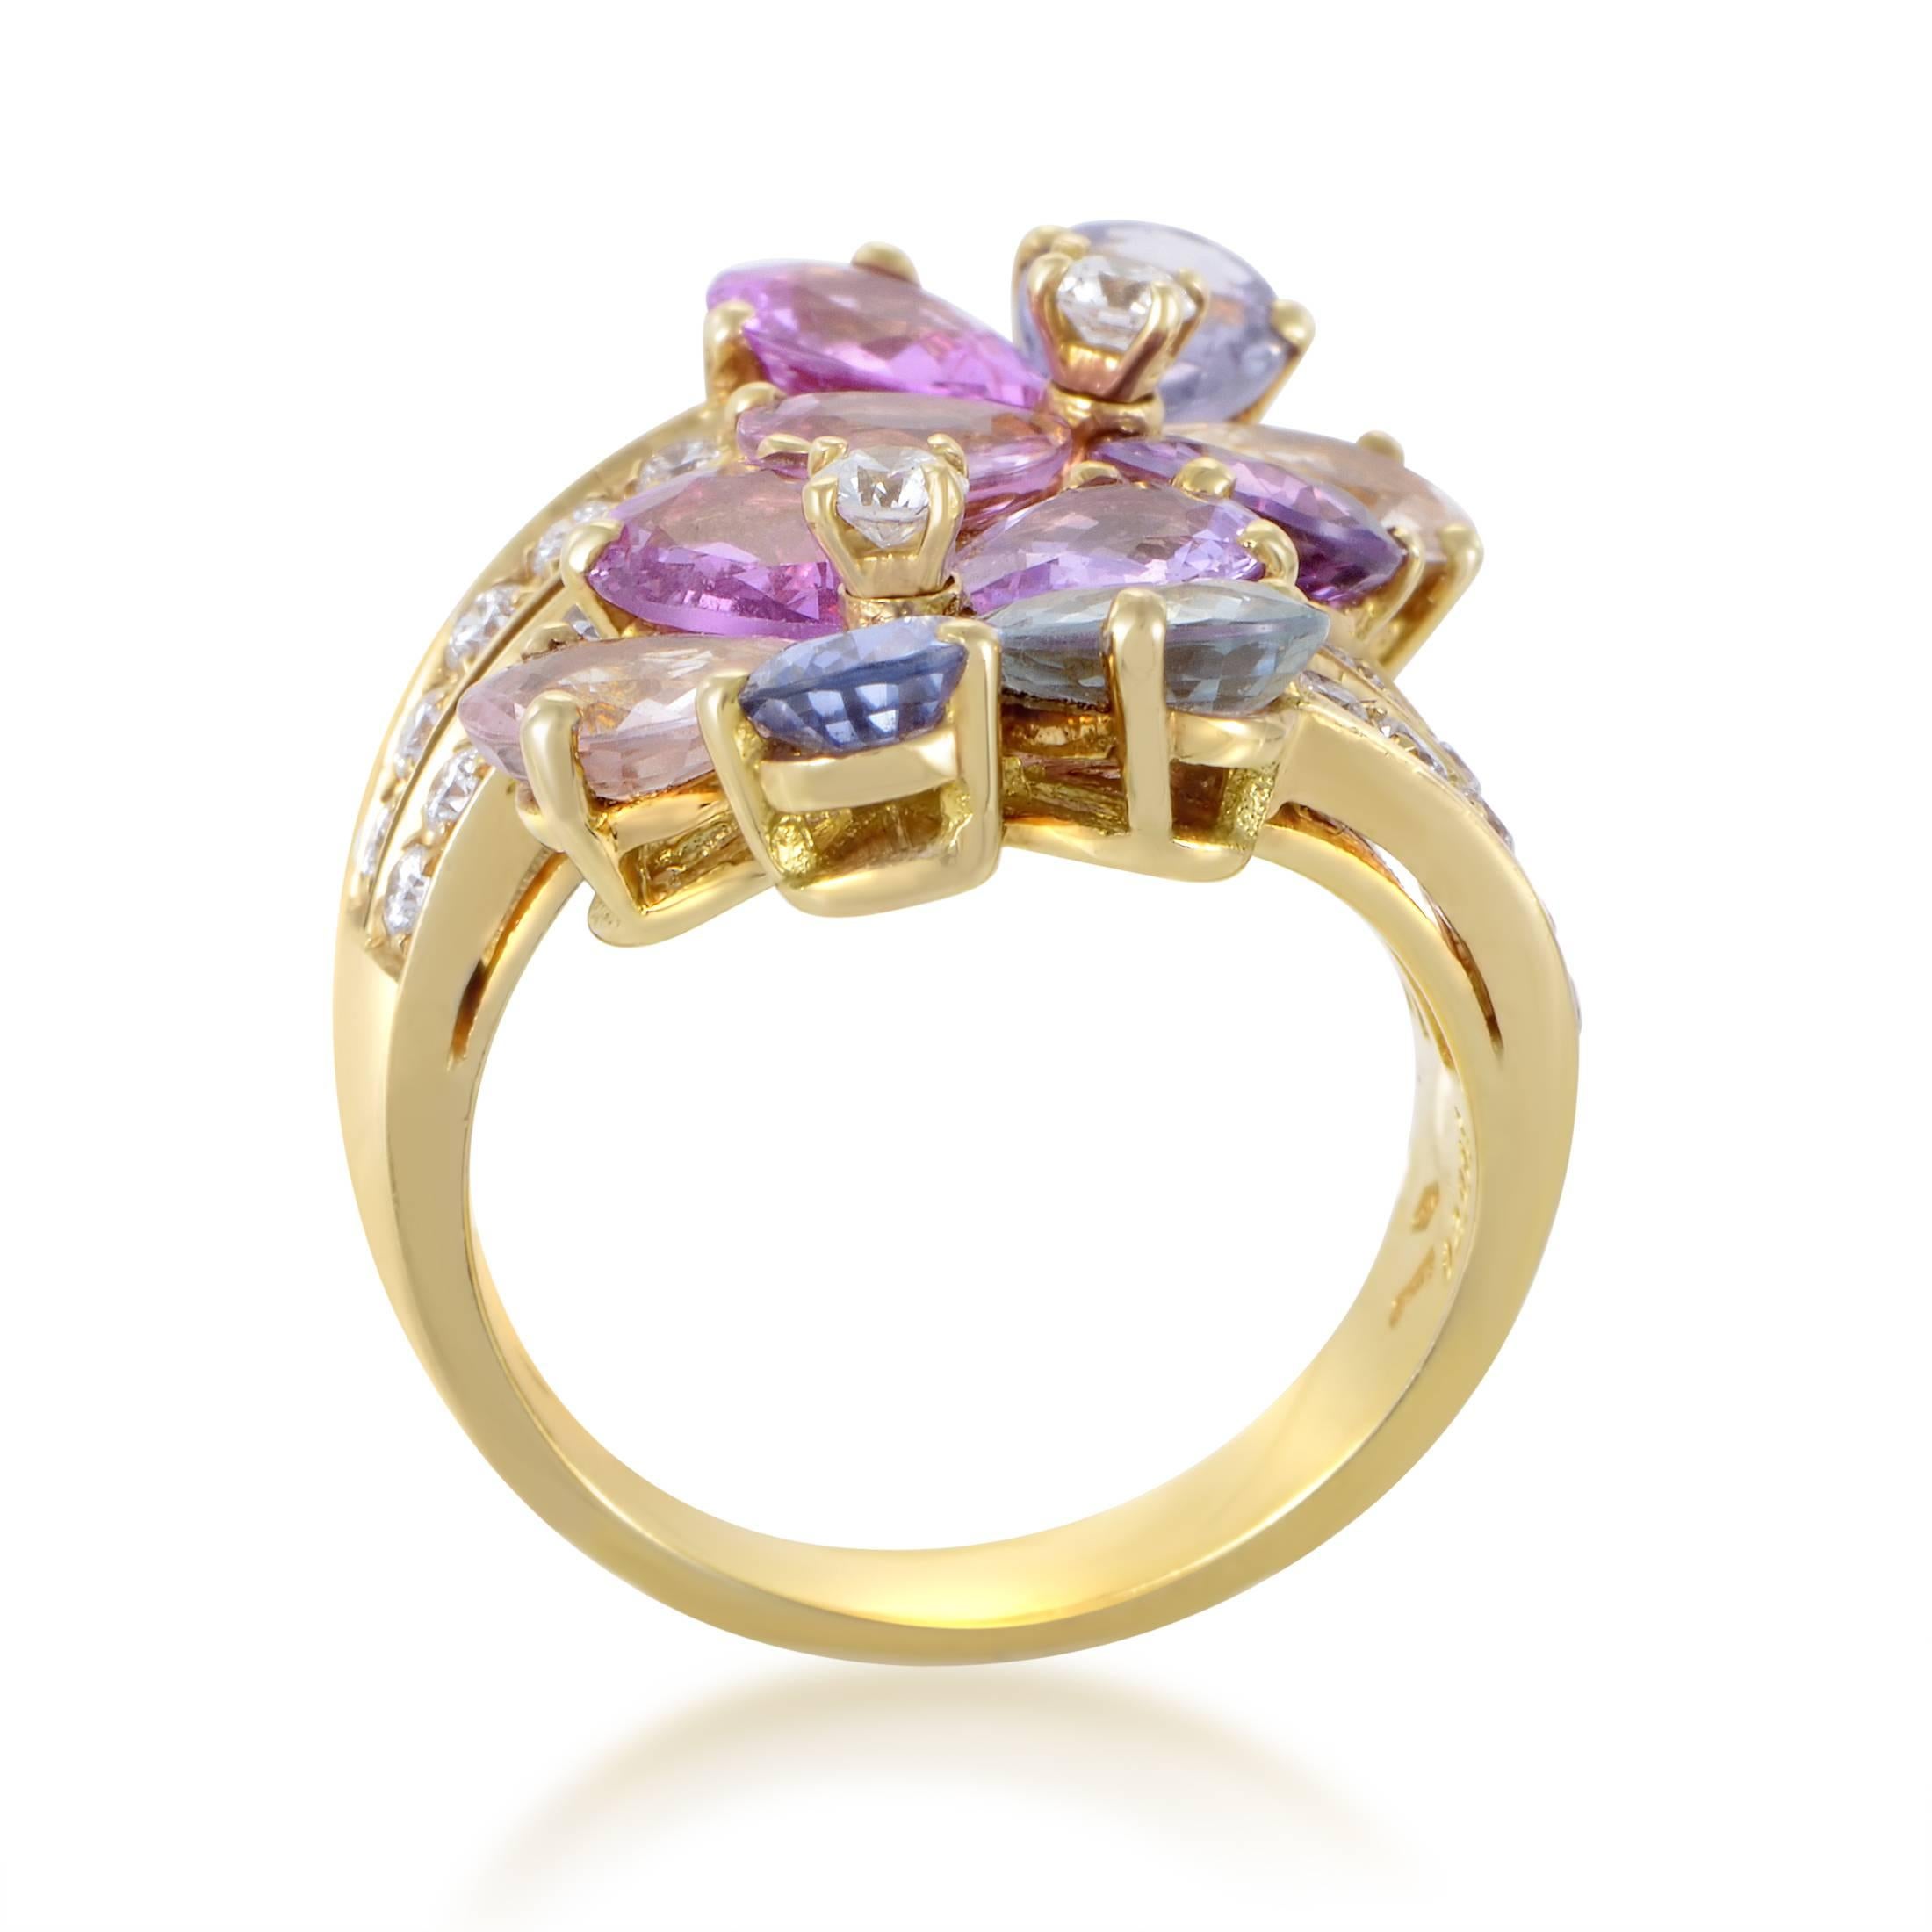 A truly extraordinary and spellbinding design sees vivacious multicolored sapphires weighing in total approximately 8.00 carats complemented by lustrous diamonds amounting to 0.75ct in this eye-catching and memorable 18K yellow gold ring from